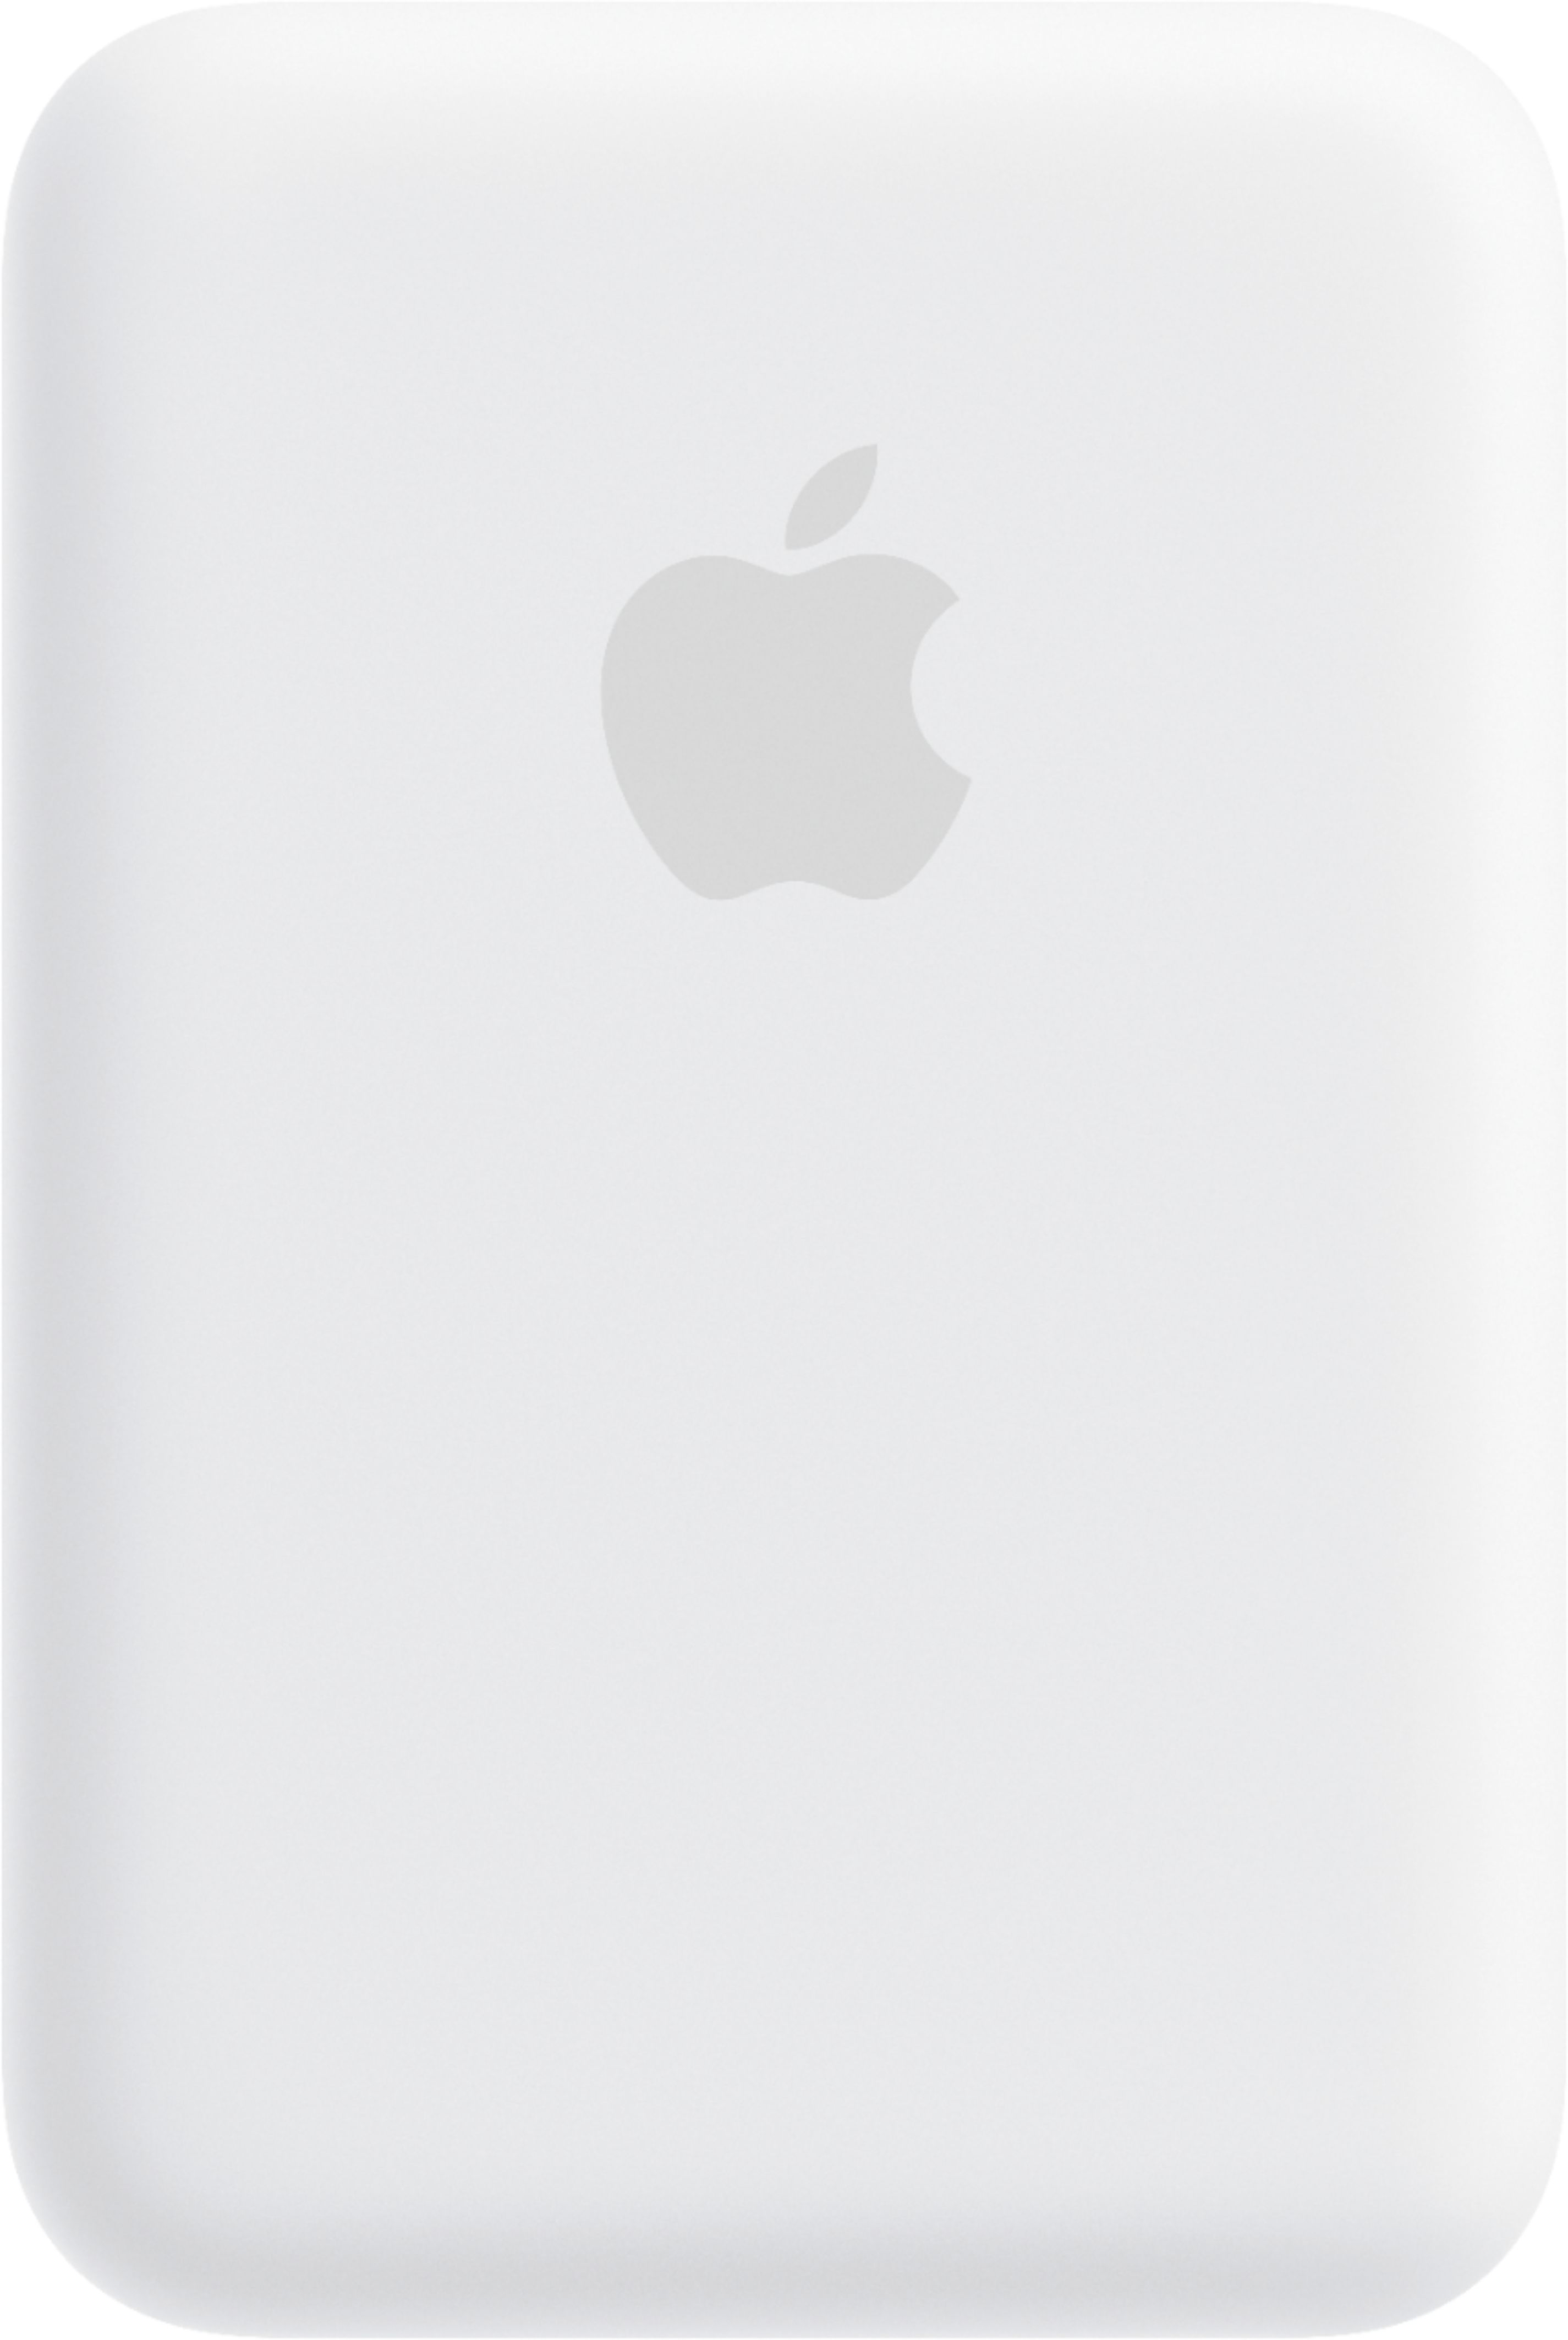 Apple MagSafe Battery Pack $79.99